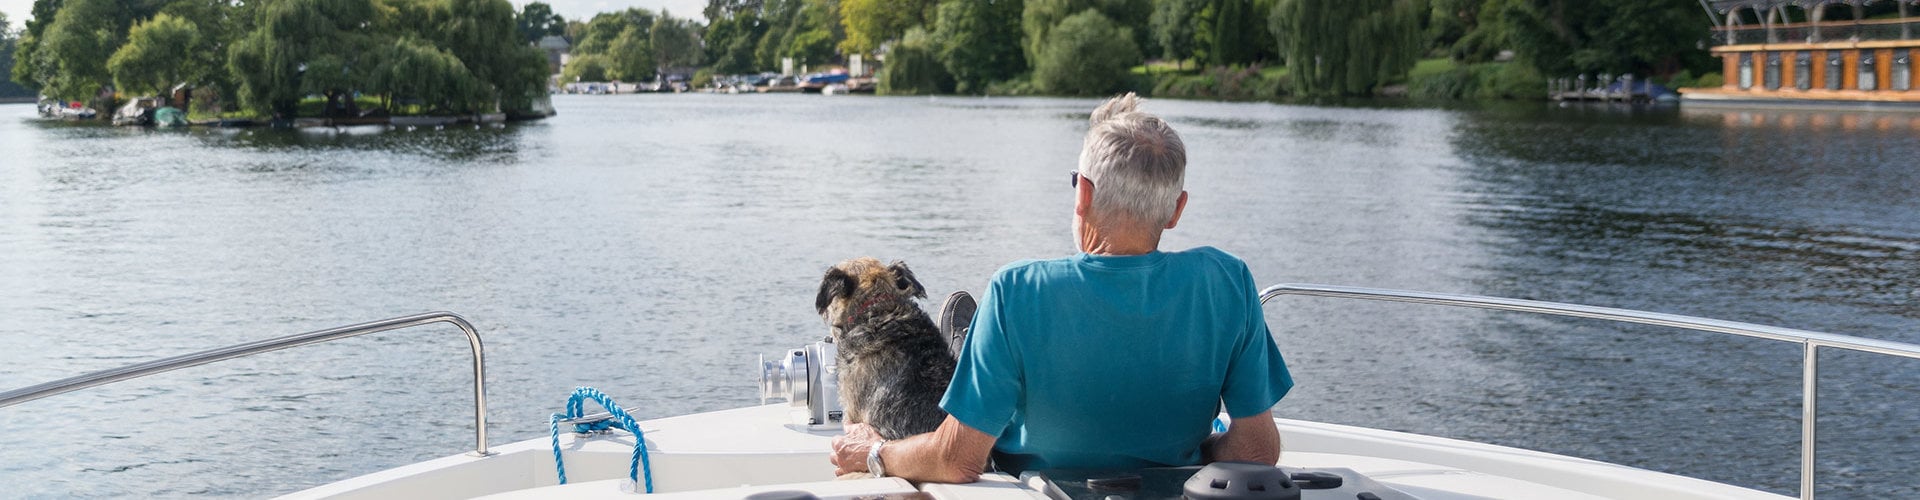 Boating holidays with dogs